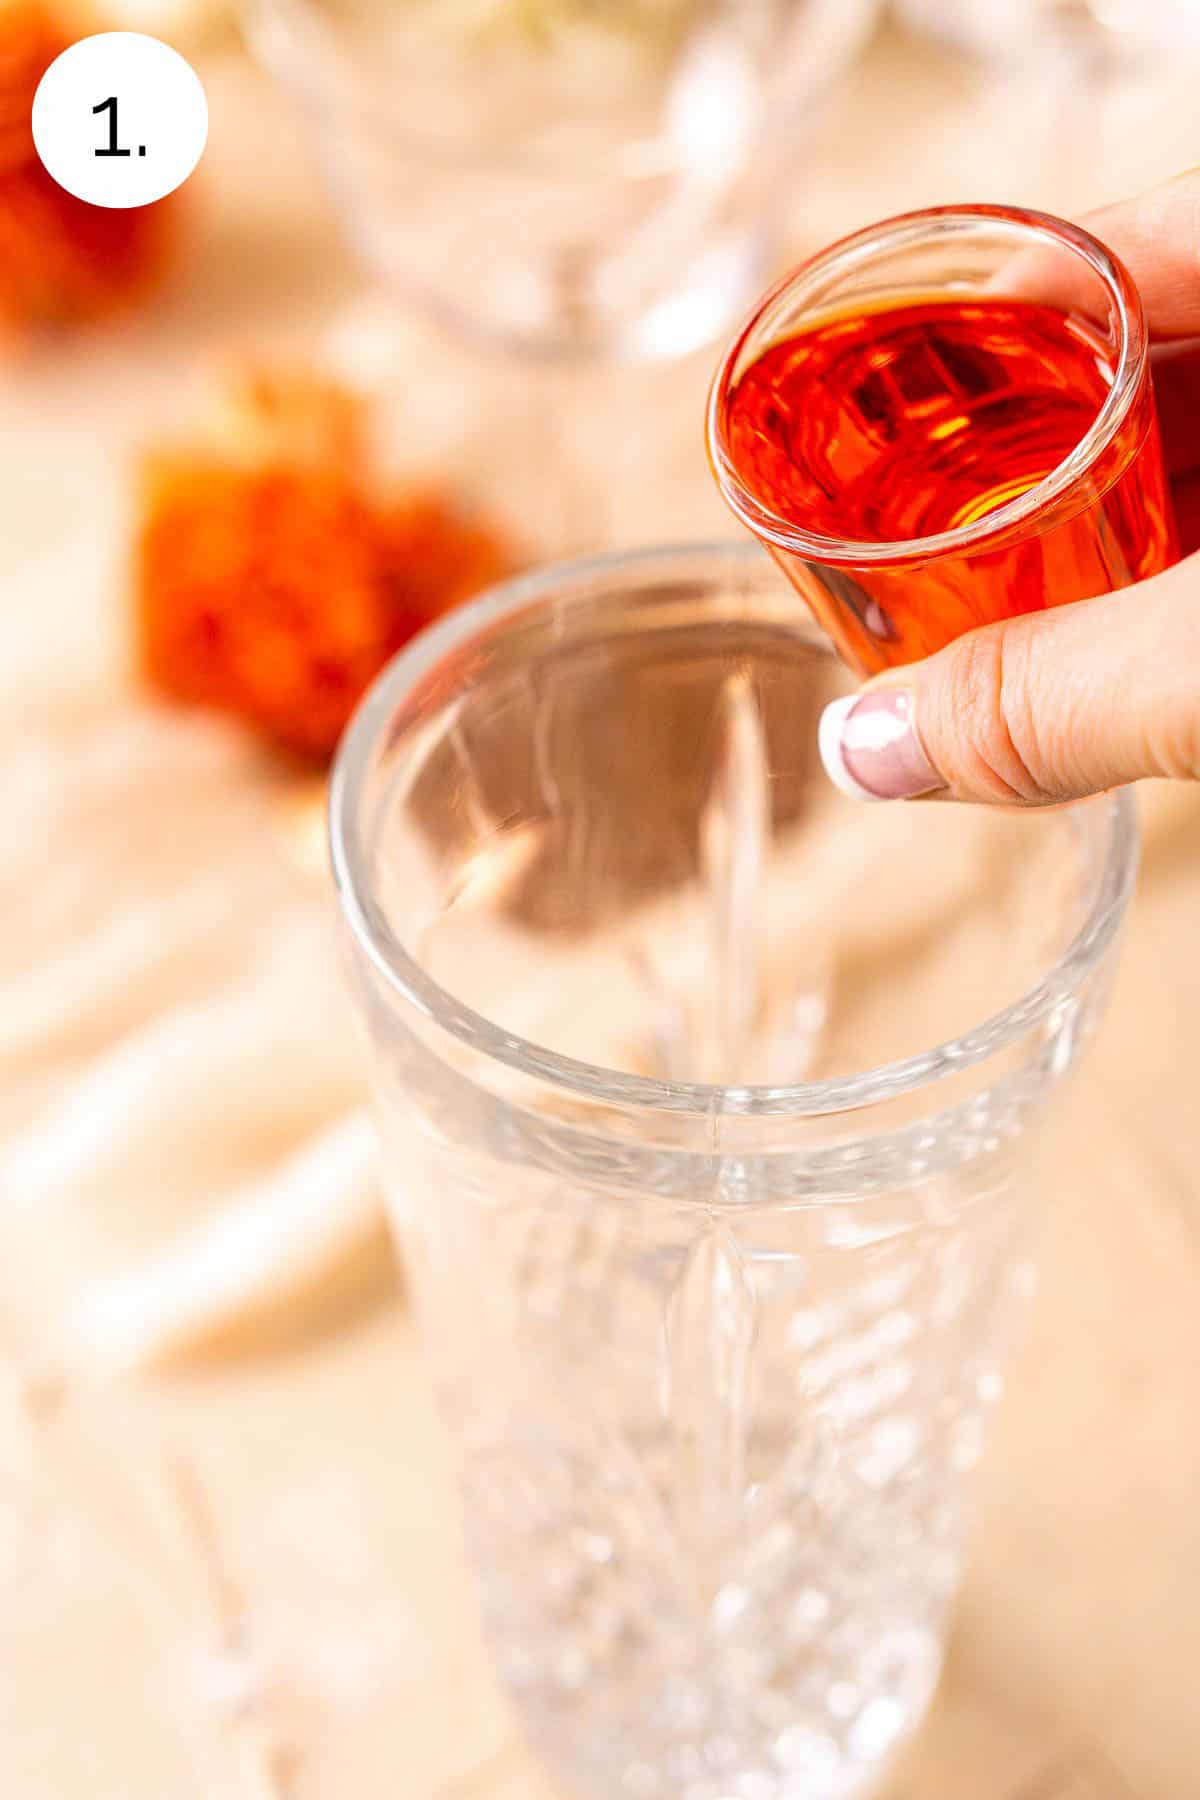 Pouring the Aperol in a clear cocktail shaker before adding the other ingredients.